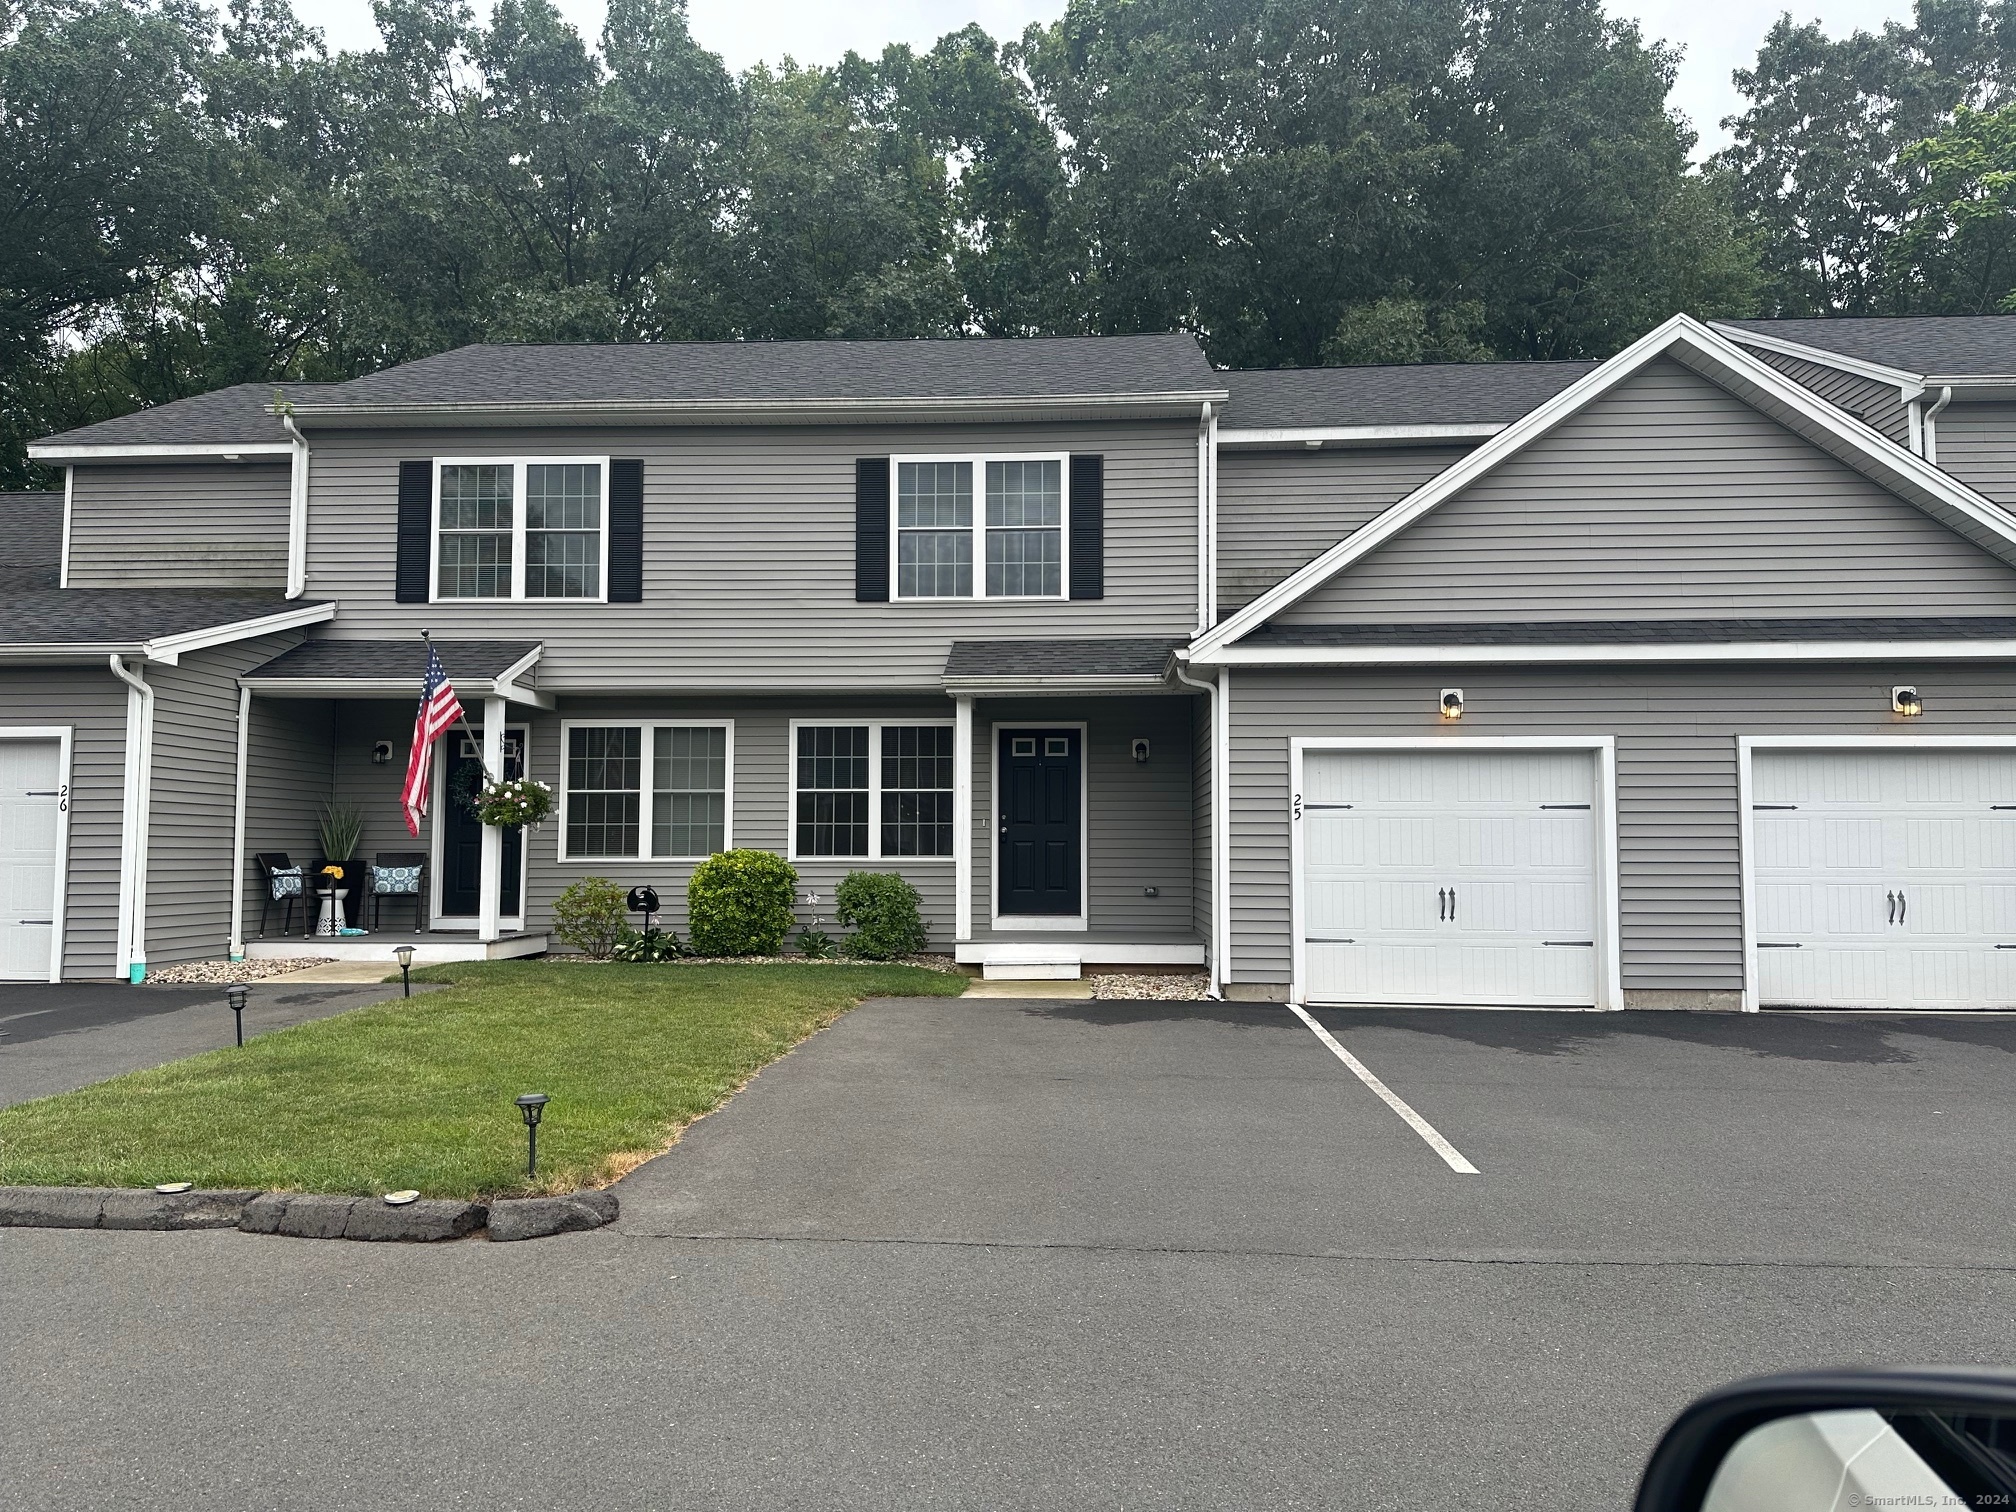 54 Tridell Drive 25, Southington, Connecticut - 3 Bedrooms  
3 Bathrooms  
6 Rooms - 